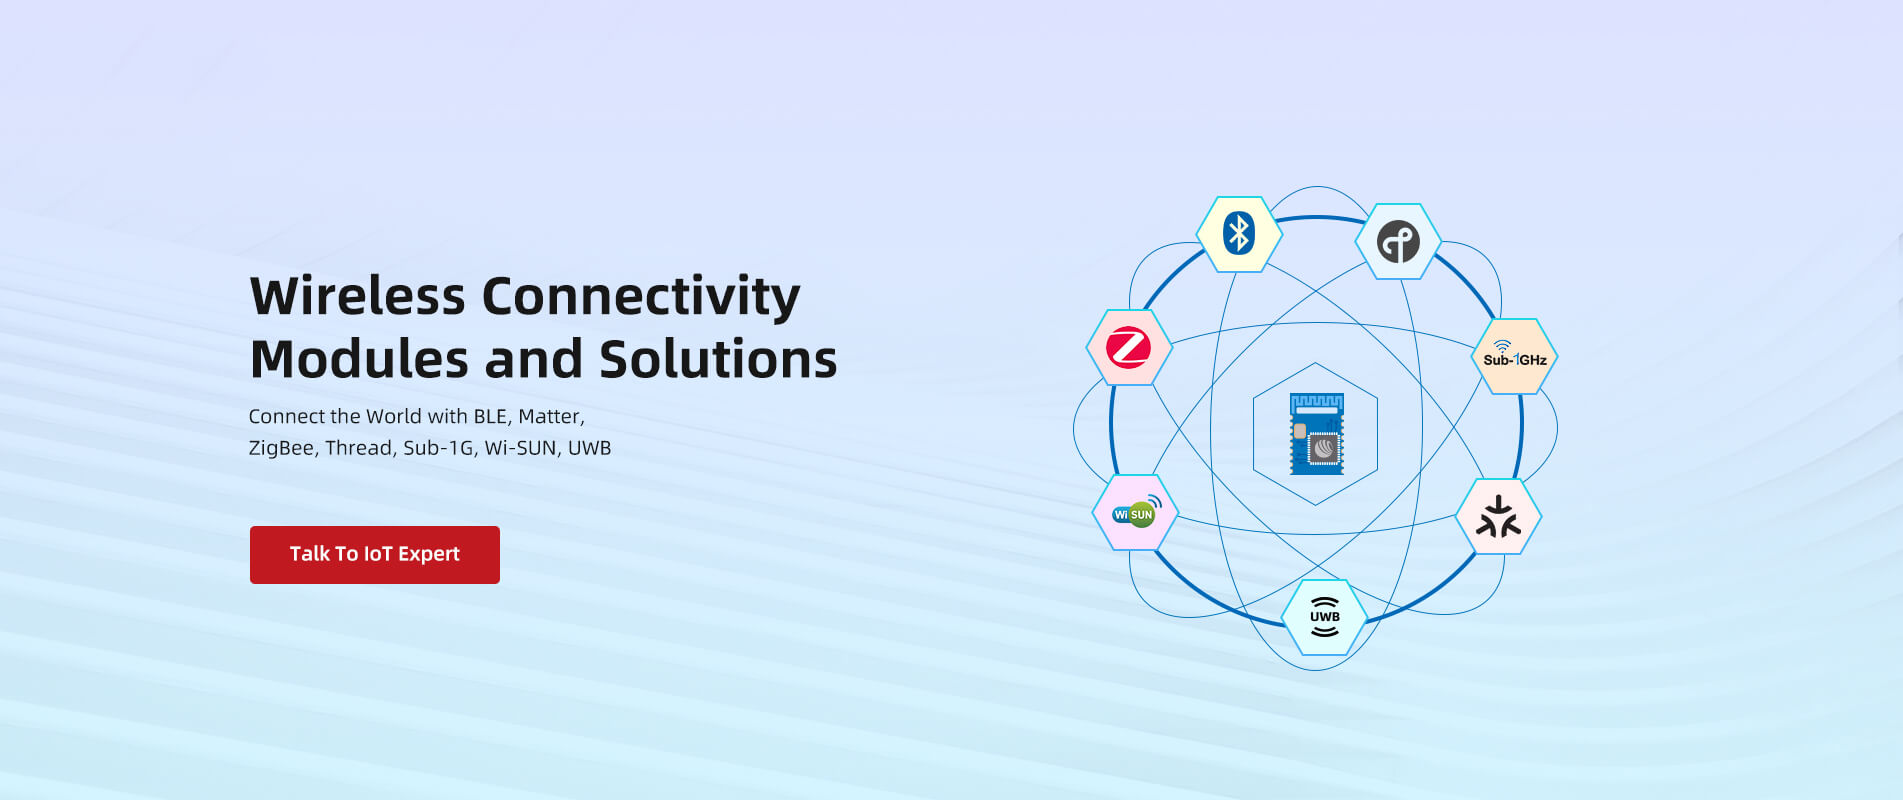 Wireless Connectivity Modules and Solutions